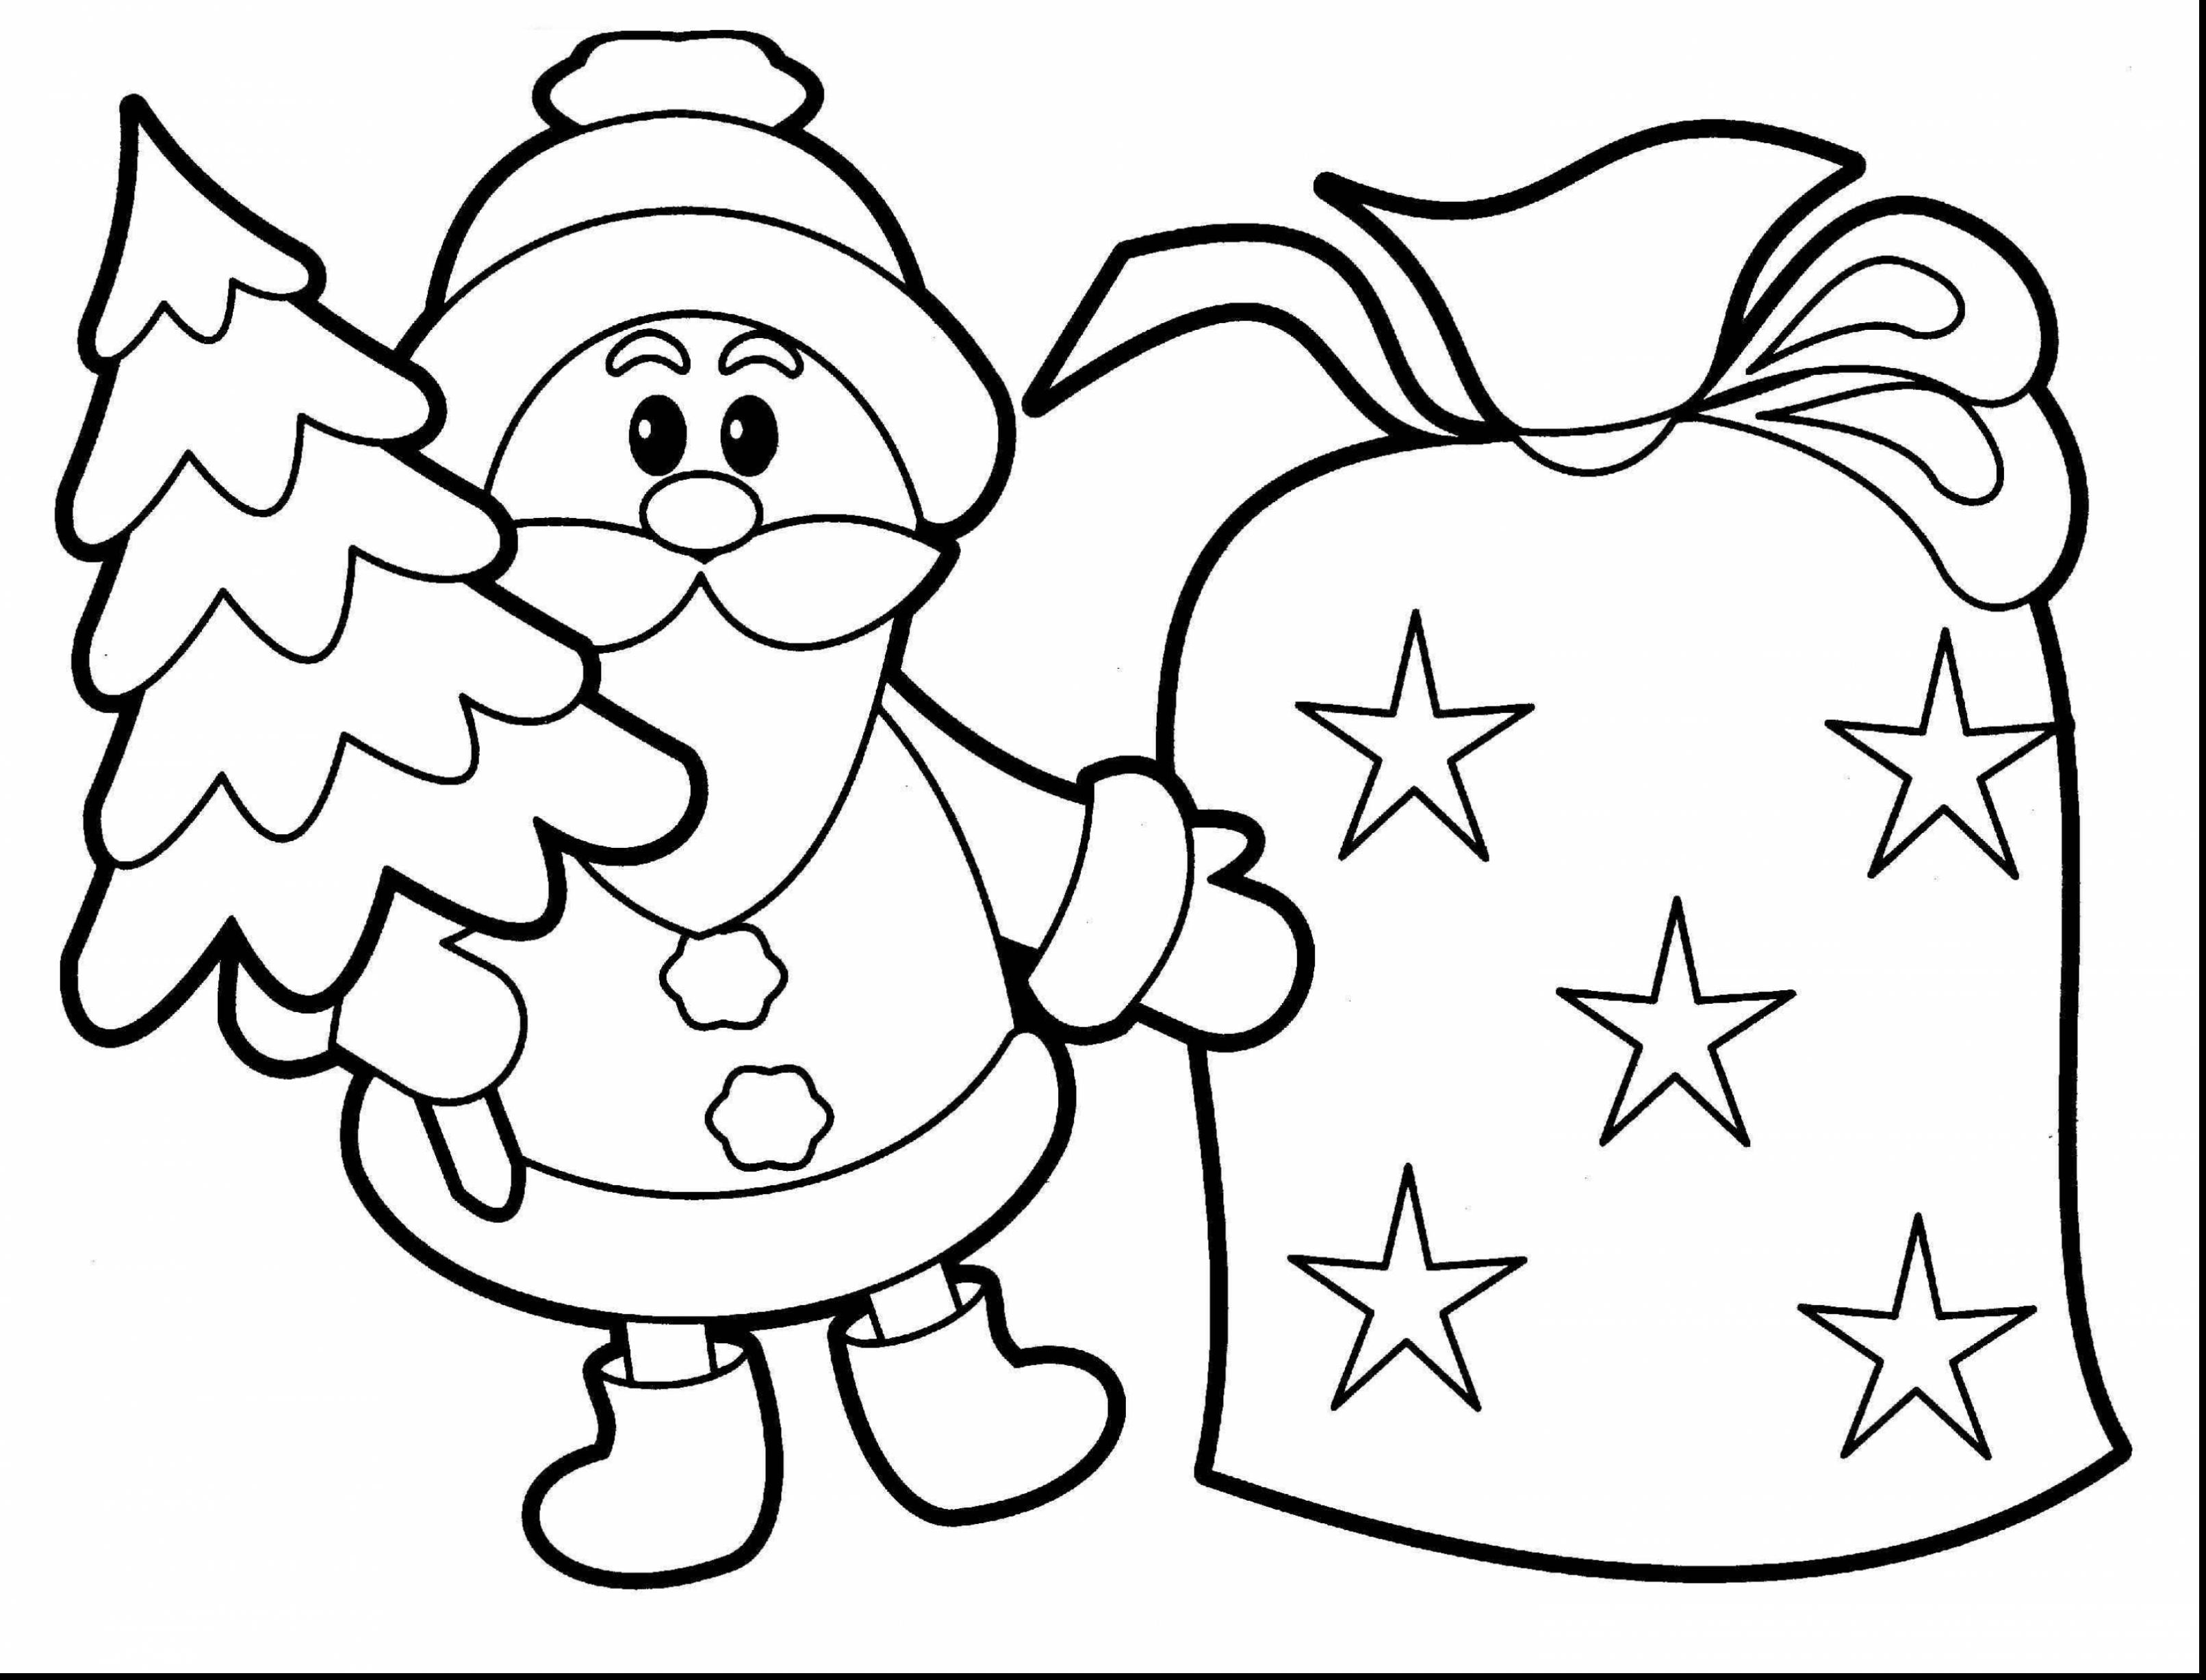 Children's Christmas Coloring Pages Free Christmas Coloring Pages Children At Getcolorings Free